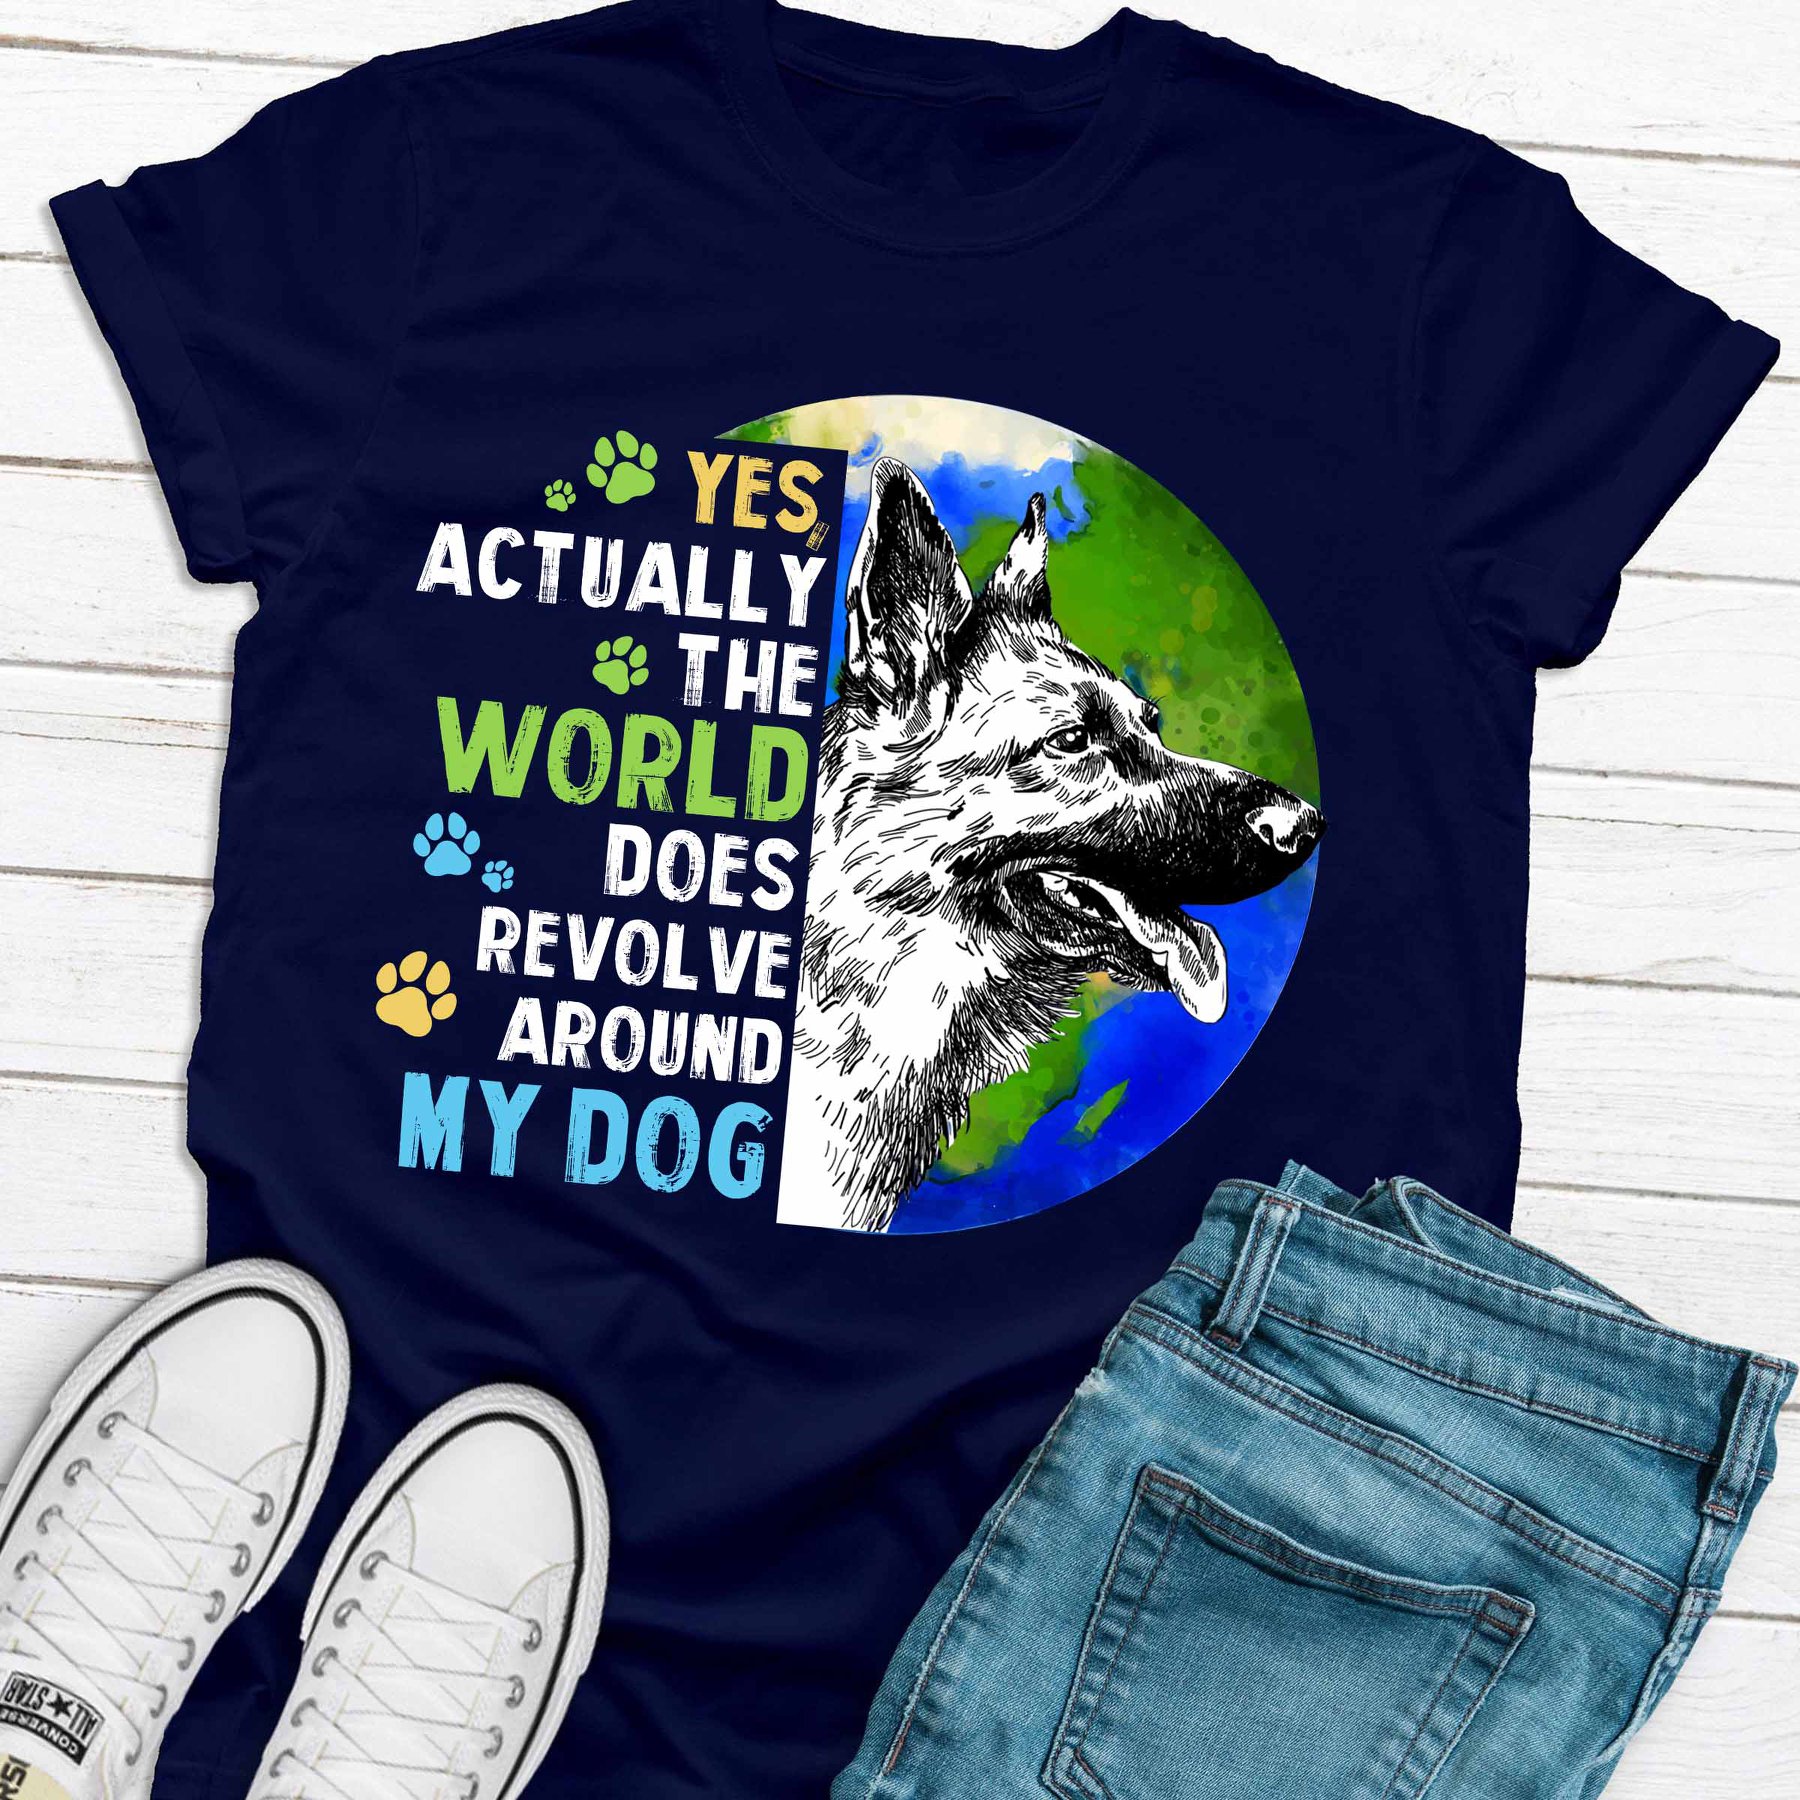 Yes actually the world does revolve around my dog - Dog and the earth